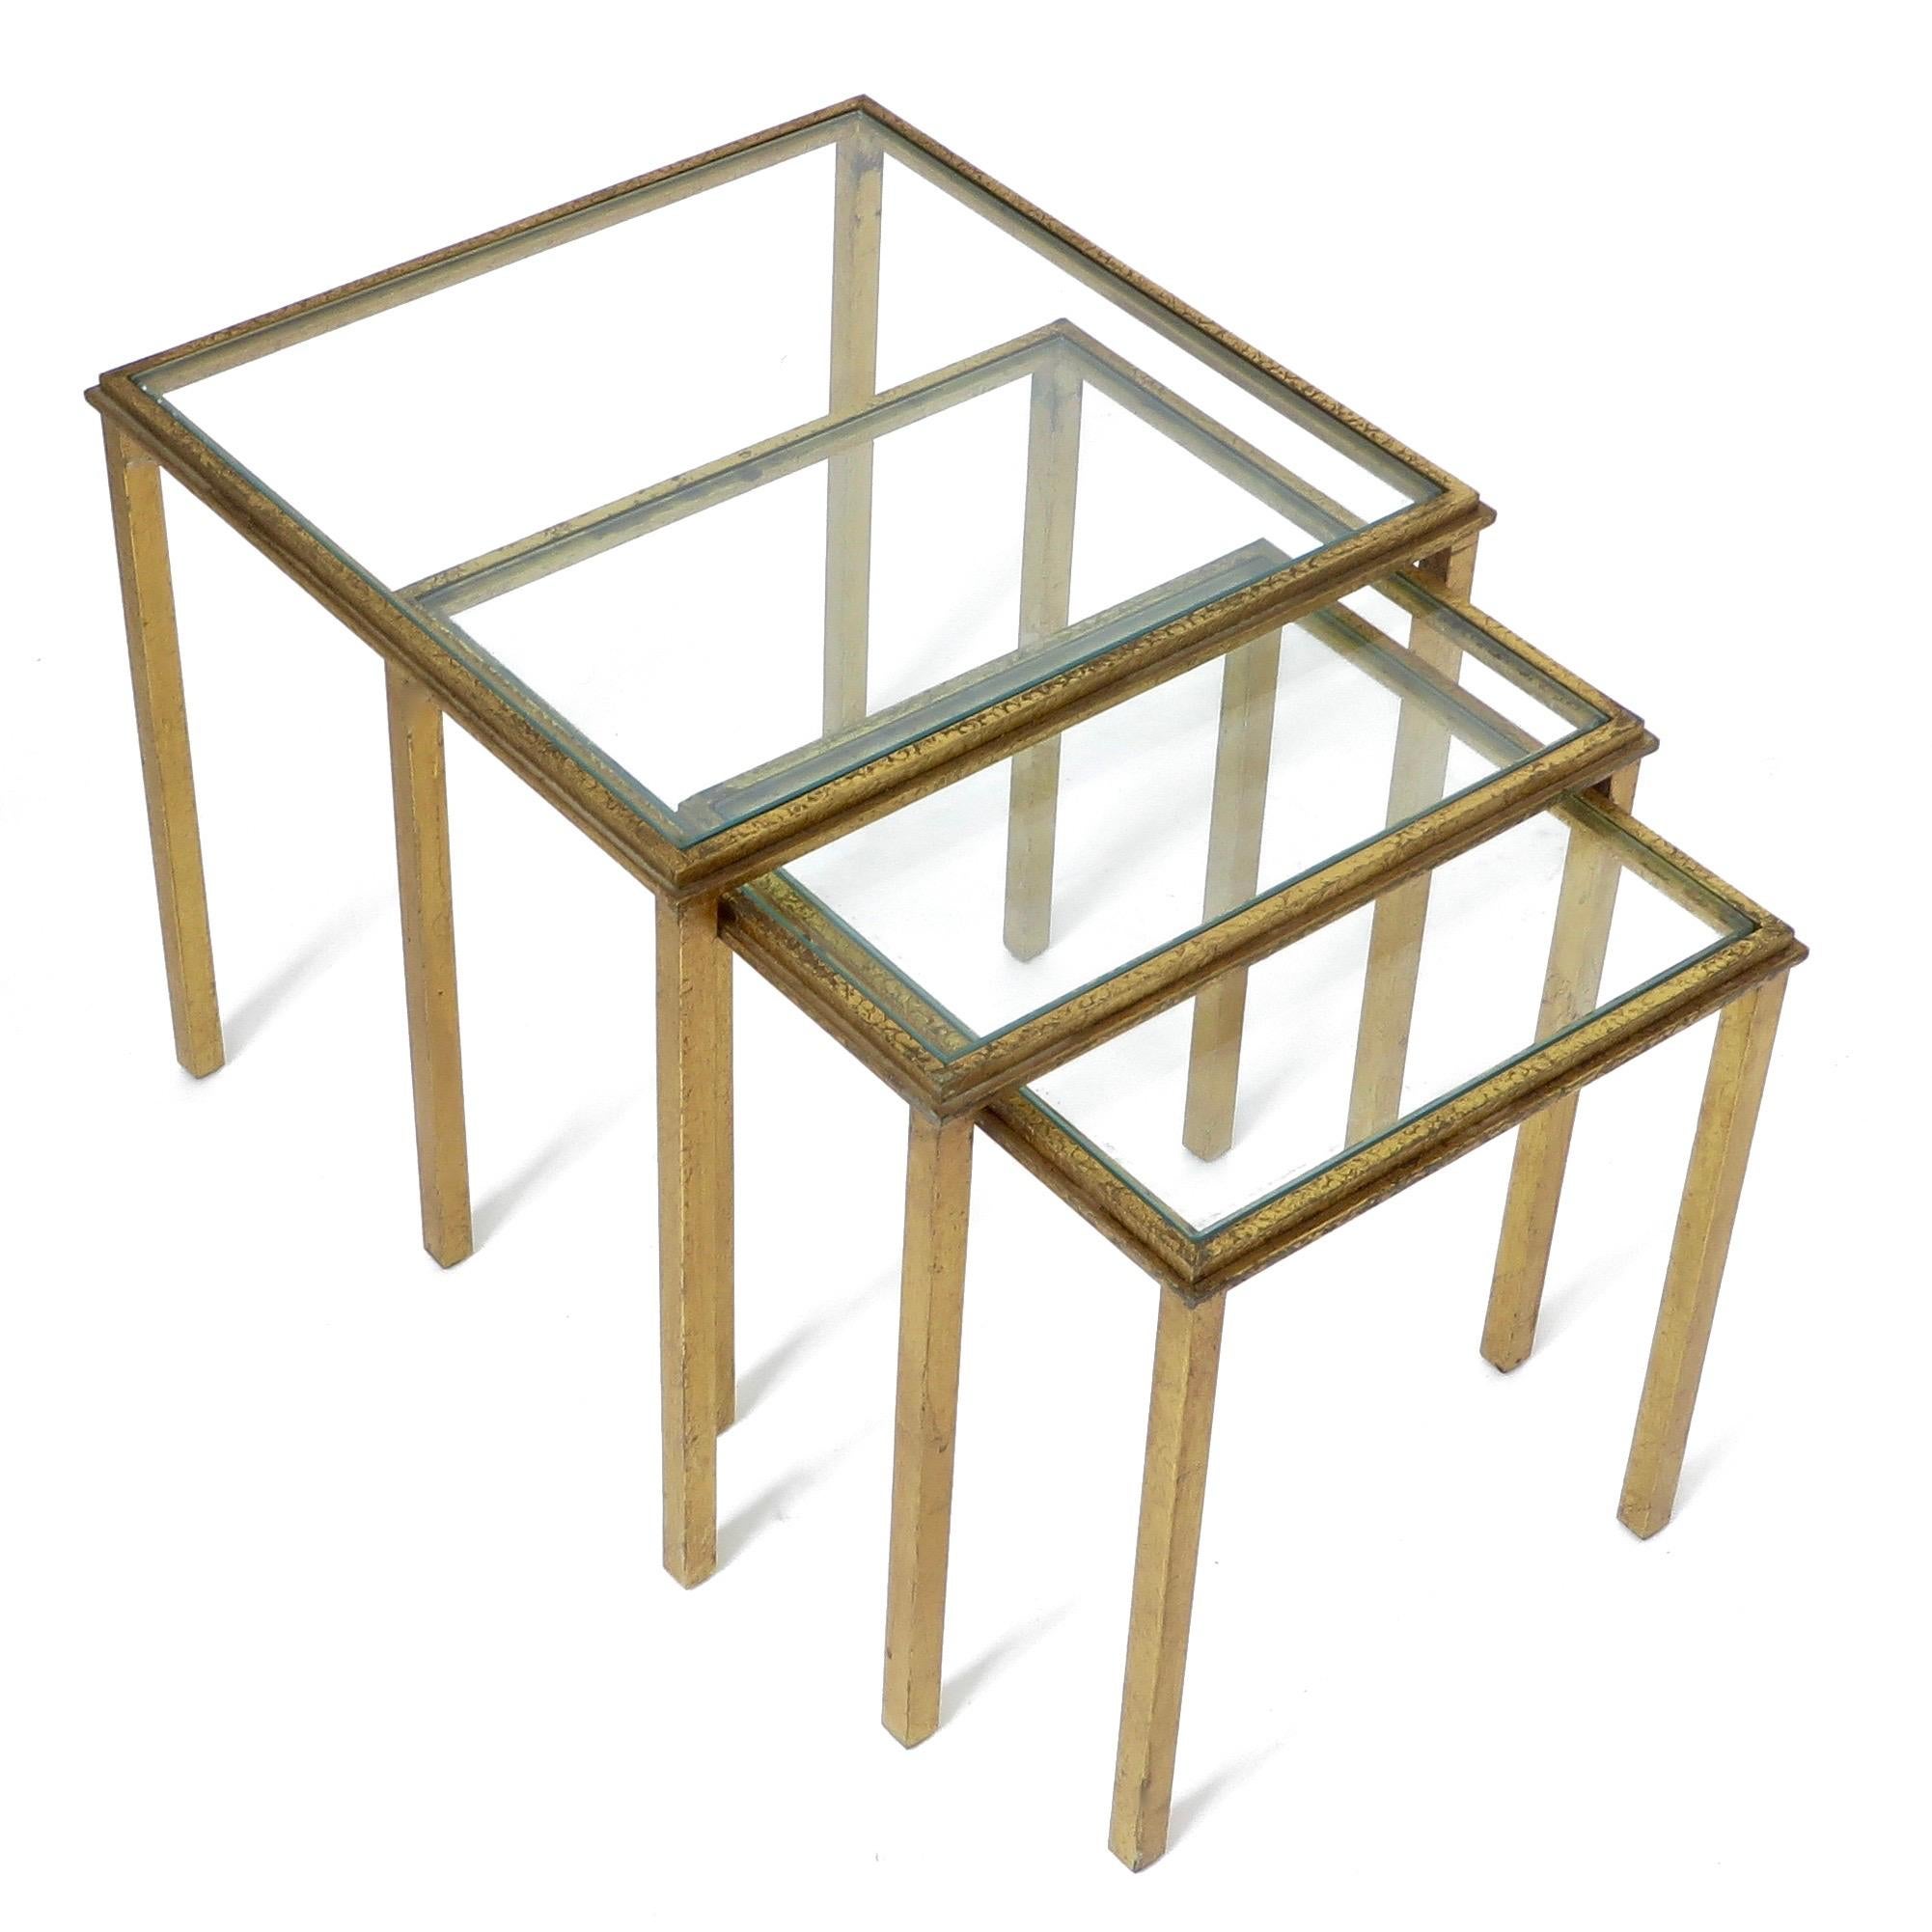 A set of three vintage circa 1960 gilded French iron nesting tables by French designer 
Roger Thibier.
Stamped Roger Thibier.
The tallest one: 15